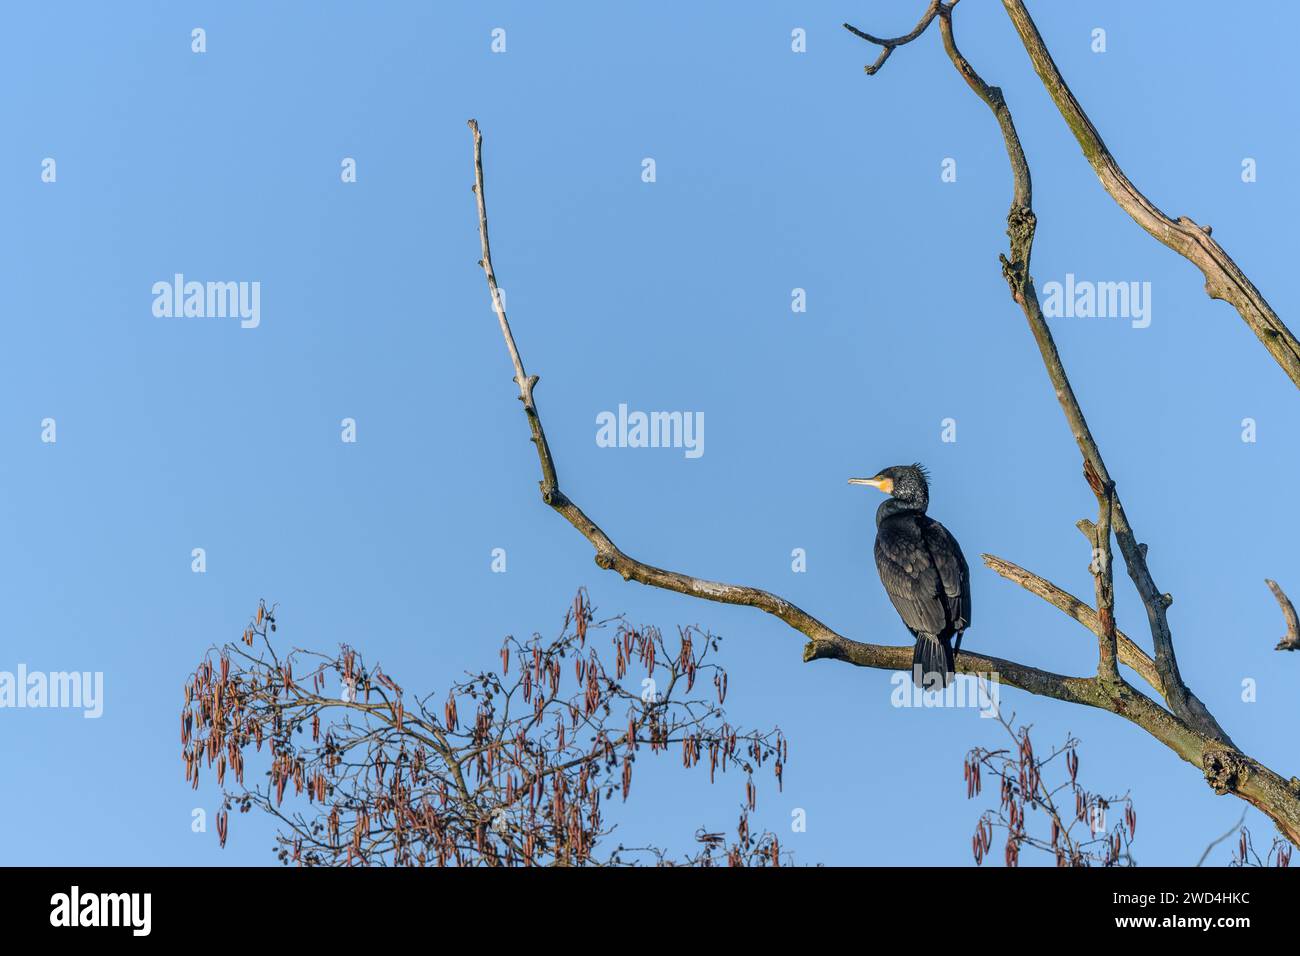 Great cormorant (Phalacrocorax carbo) perched in a tree in winters. Bas-Rhin, Alsace,Grand Est, France, Europe. Stock Photo